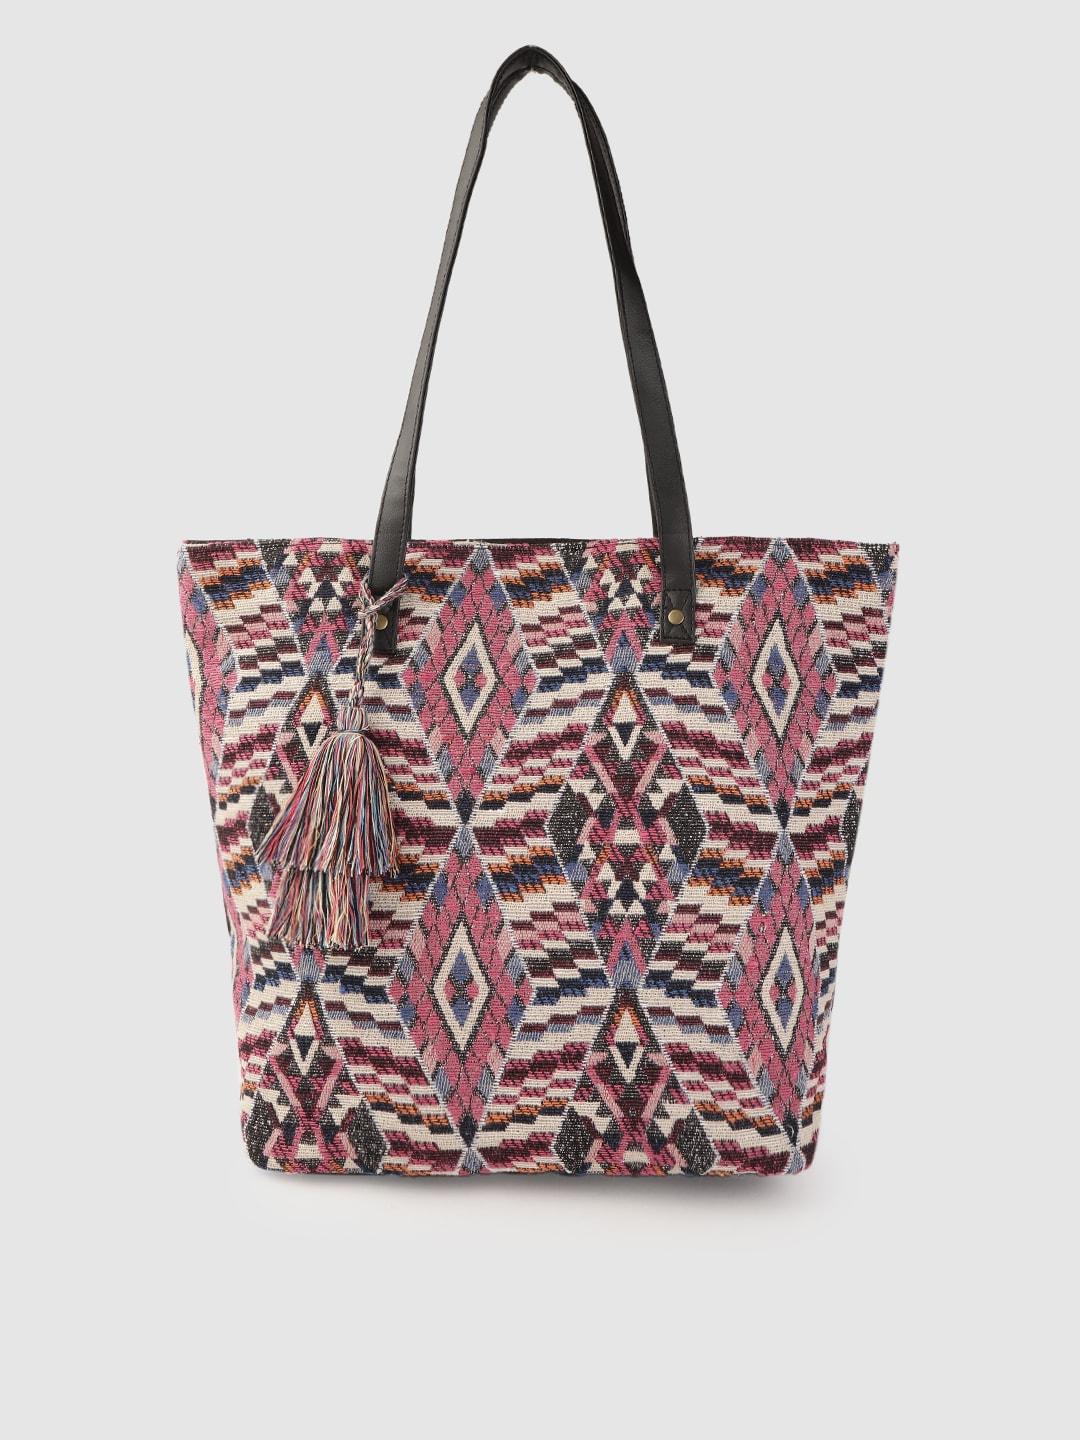 anouk-pink-&-black-geometric-patterned-shopper-tote-bag-with-tasselled-detail